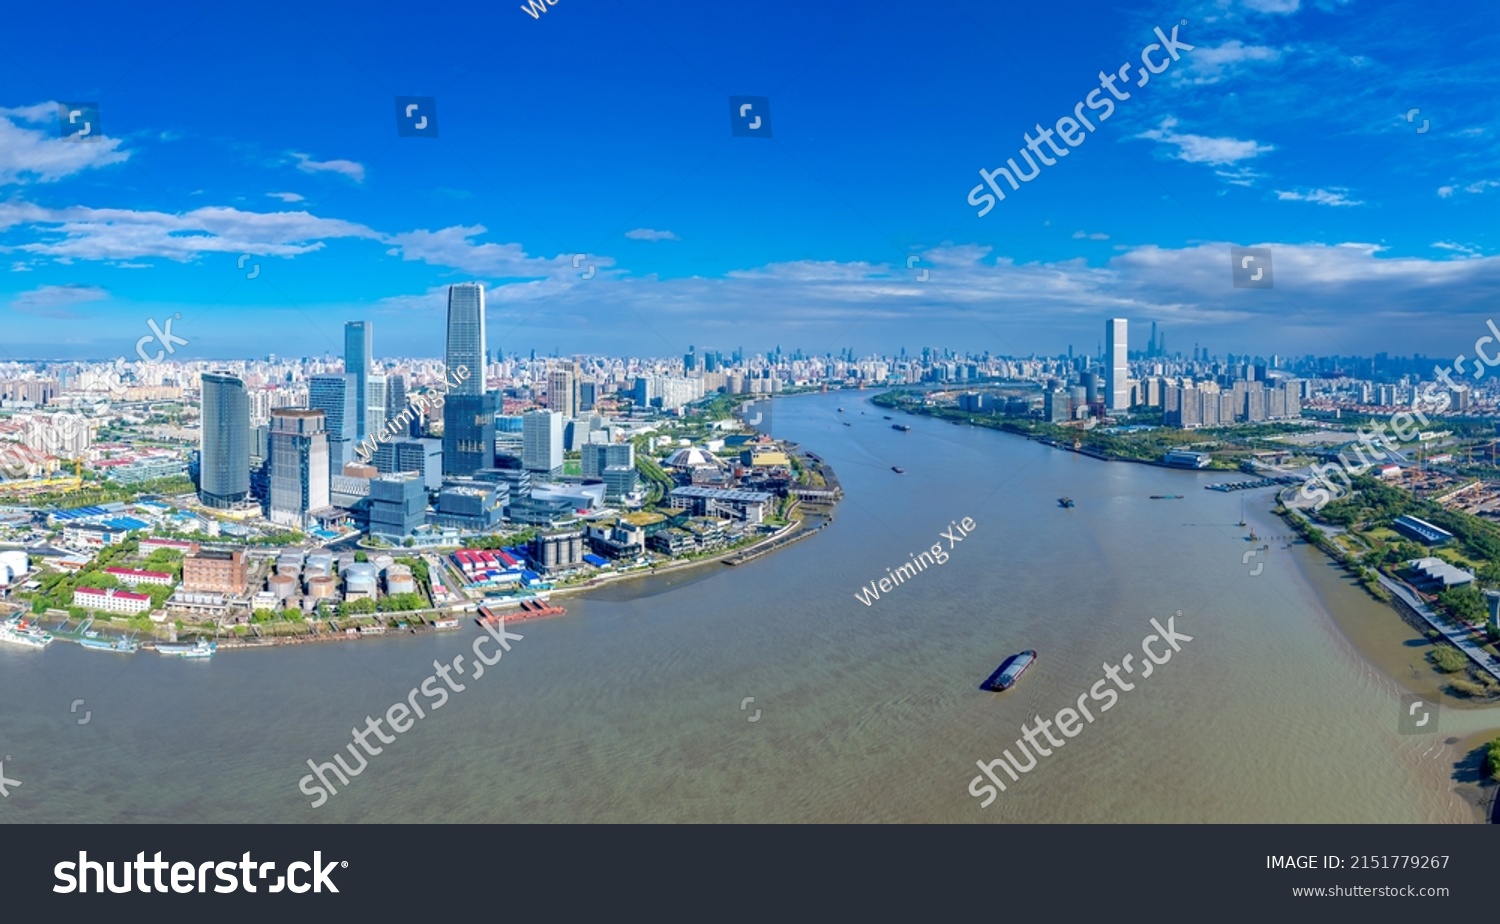 West Bank business district and Qiantan International Business District, Shanghai, China  #2151779267